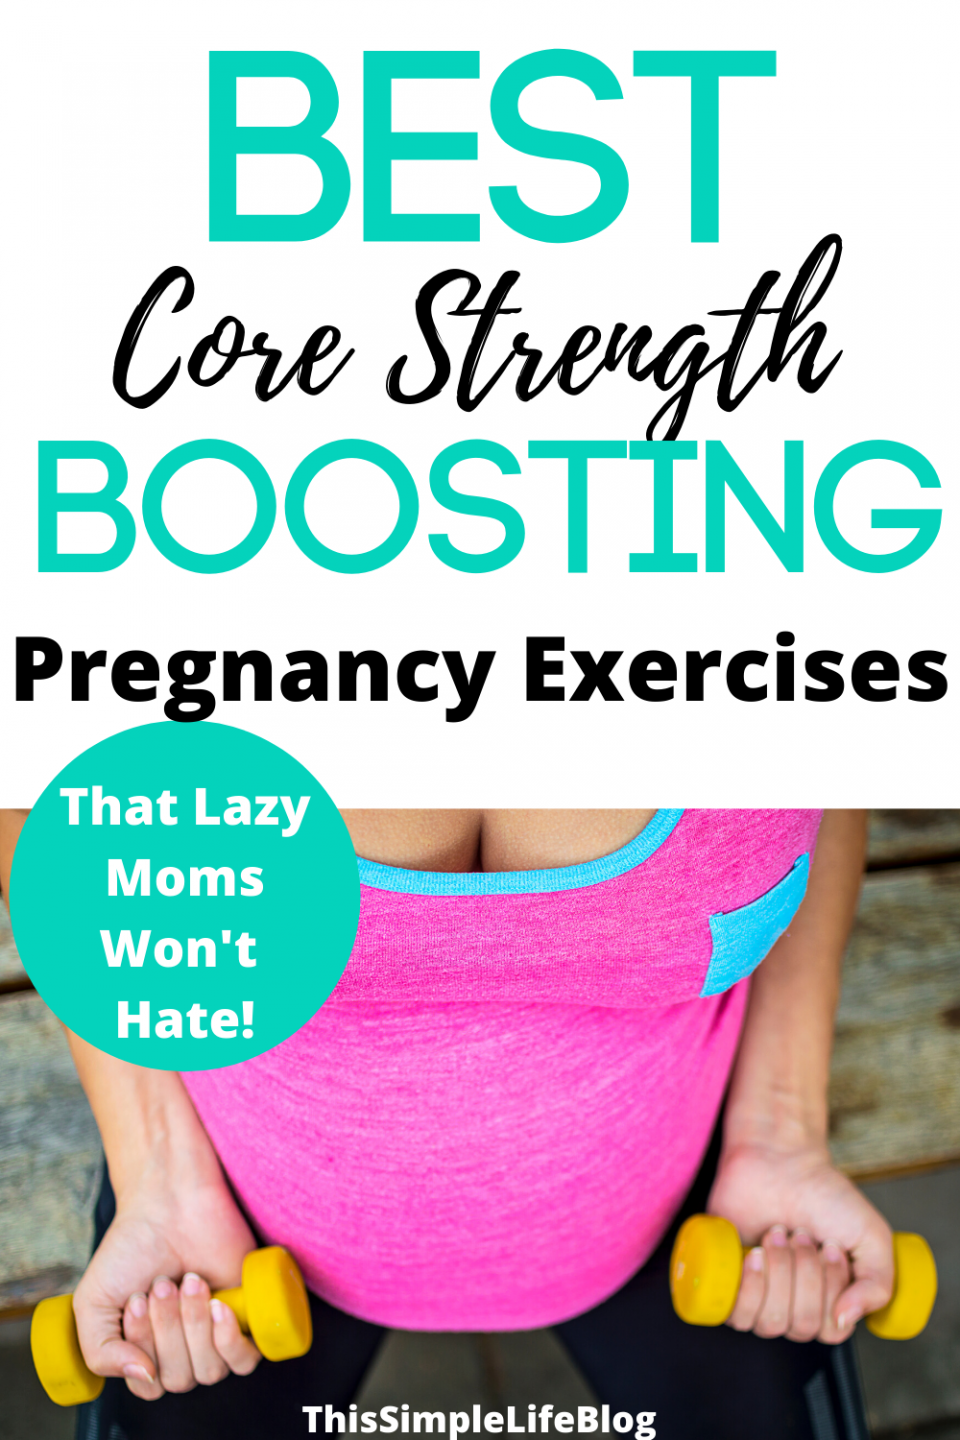 Best Core Strength Boosting Pregnancy workouts